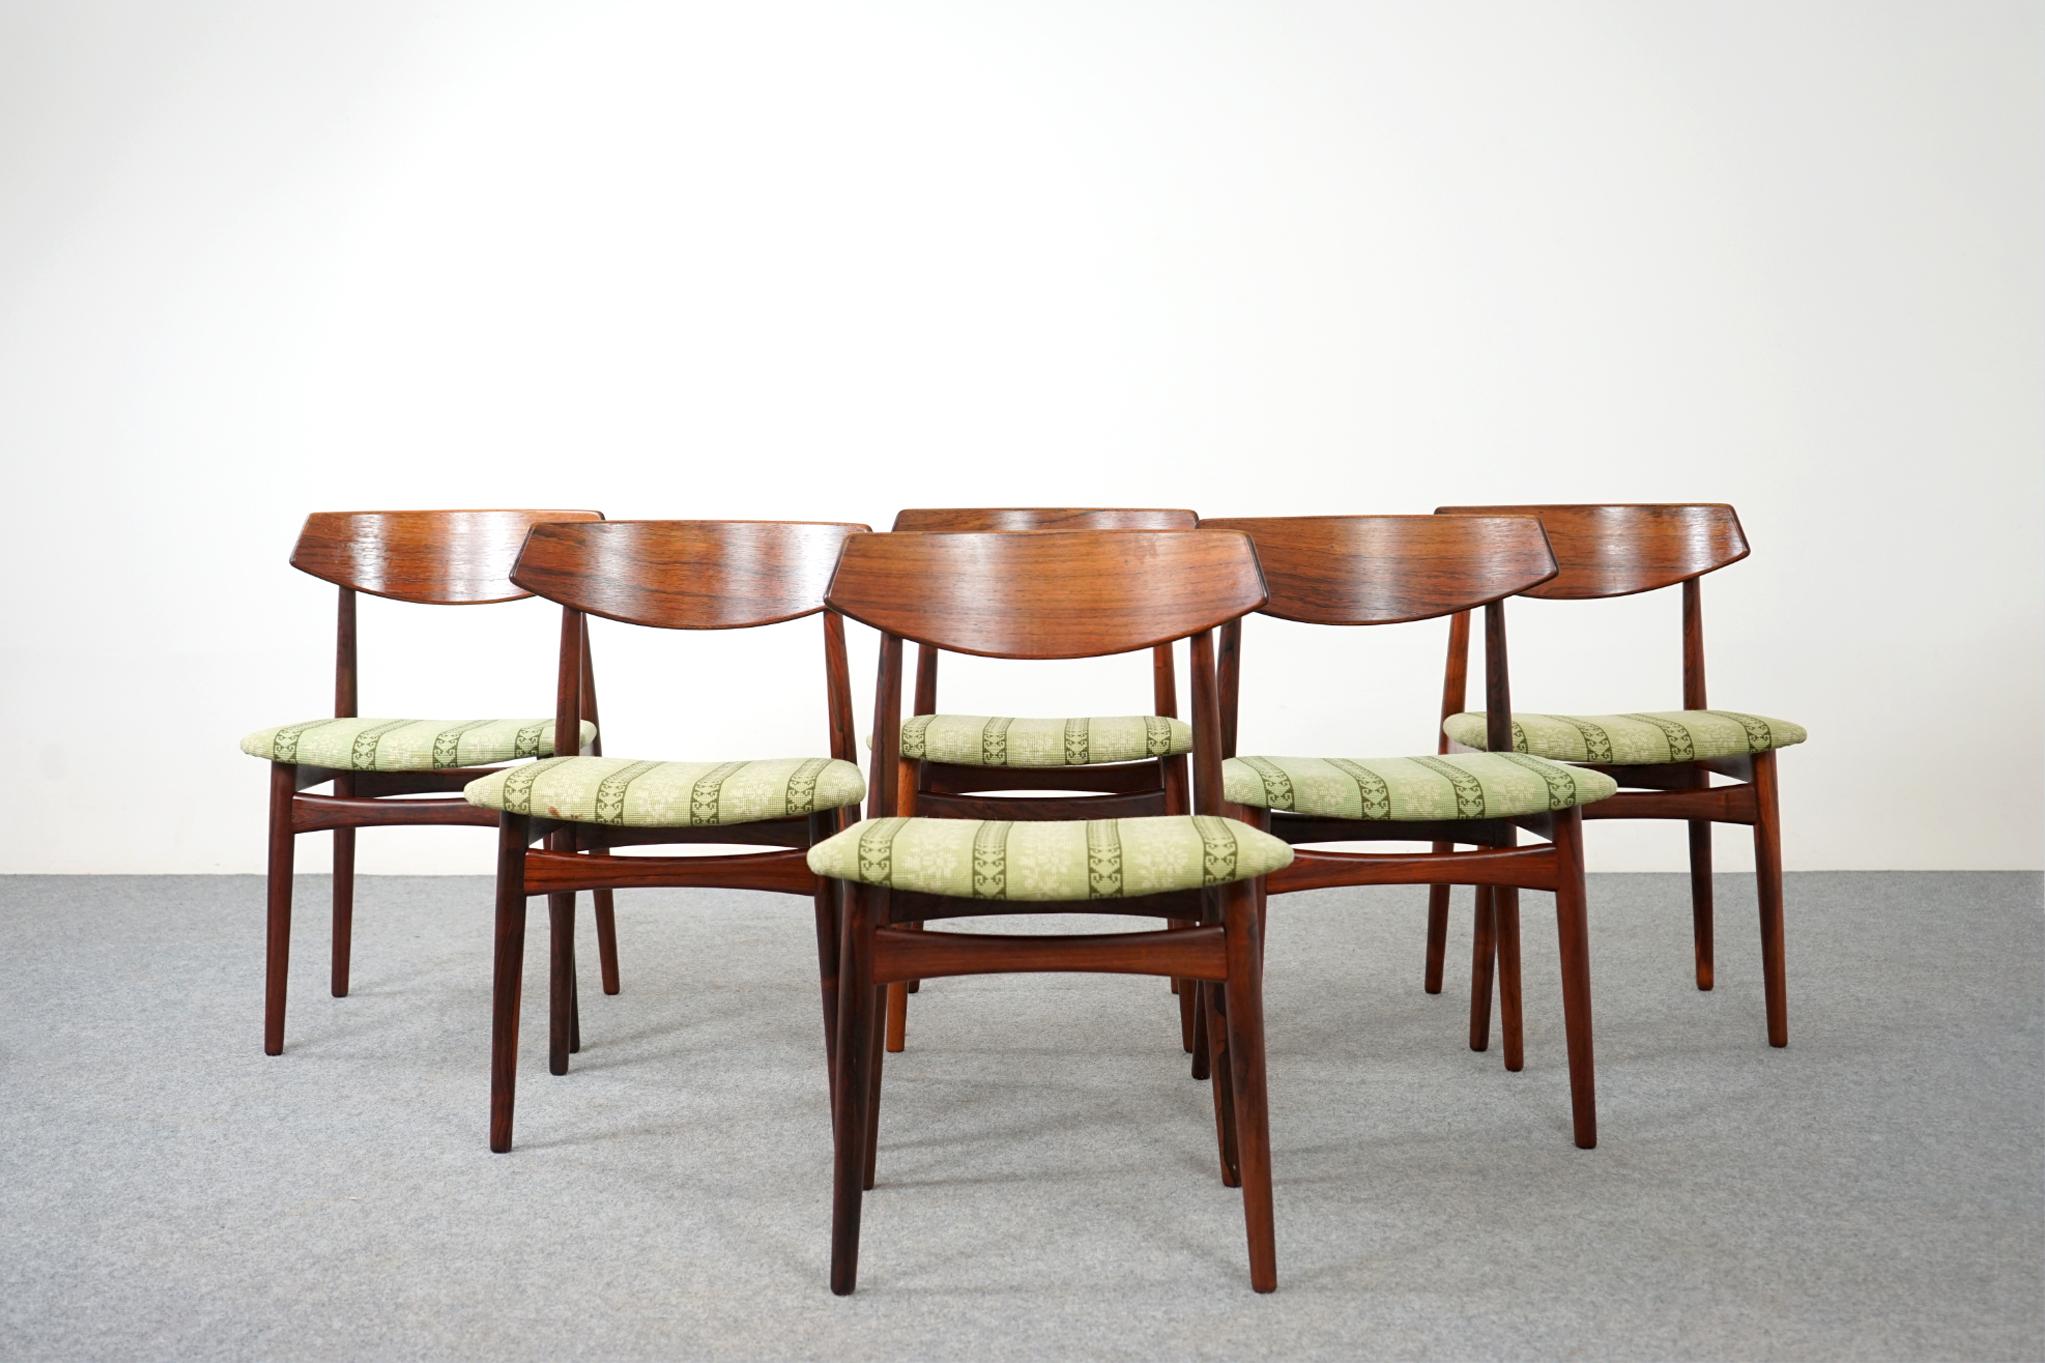 Rosewood mid-century dining chairs, circa 1960's. Beautifully curved backrests provide support and comfort. Generous floating seat design adds an air elegance, lovely bowtie supports for added stability. Original upholstery, removable seat pad makes